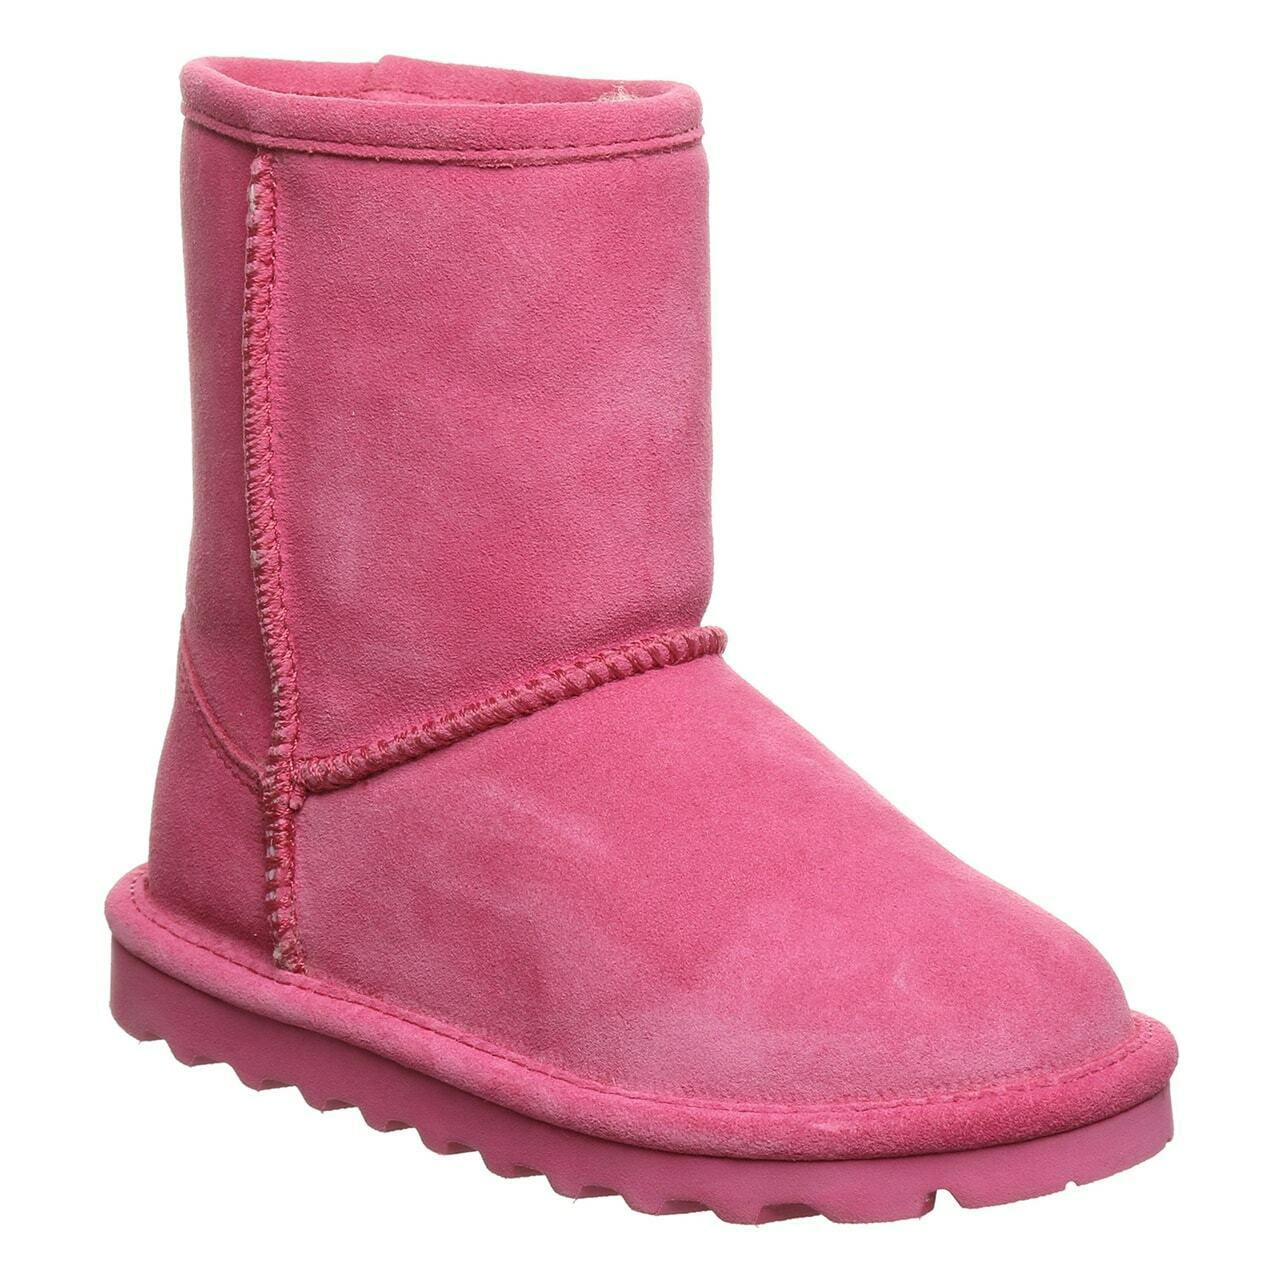 Bearpaw Party Pink Elle Youth Boots, Size 4 - Walmart.com